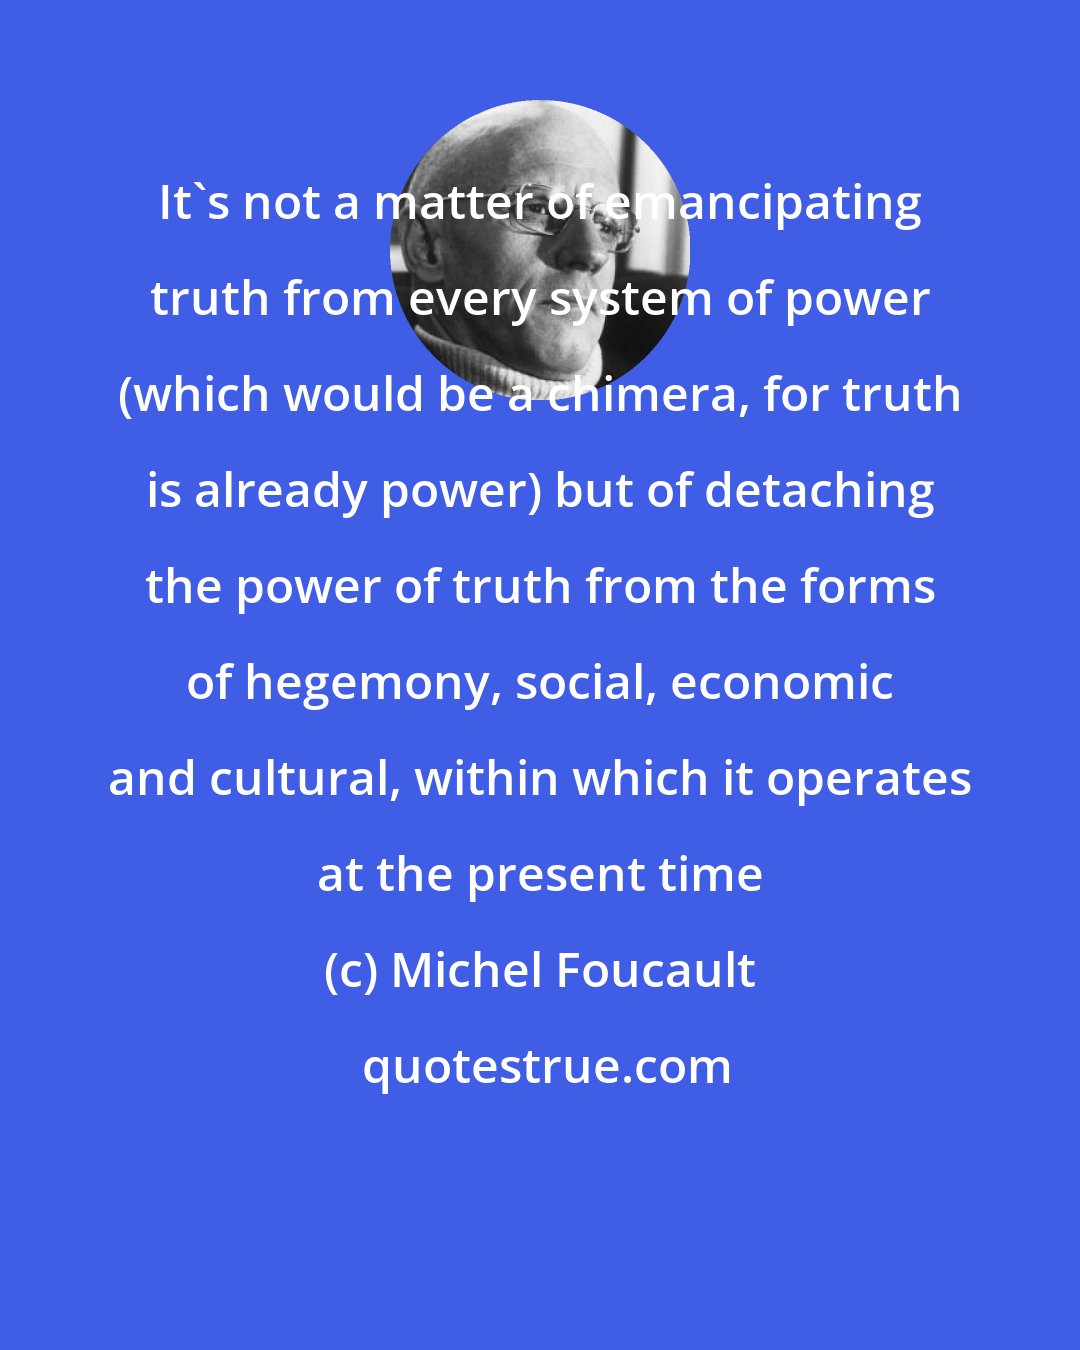 Michel Foucault: It's not a matter of emancipating truth from every system of power (which would be a chimera, for truth is already power) but of detaching the power of truth from the forms of hegemony, social, economic and cultural, within which it operates at the present time